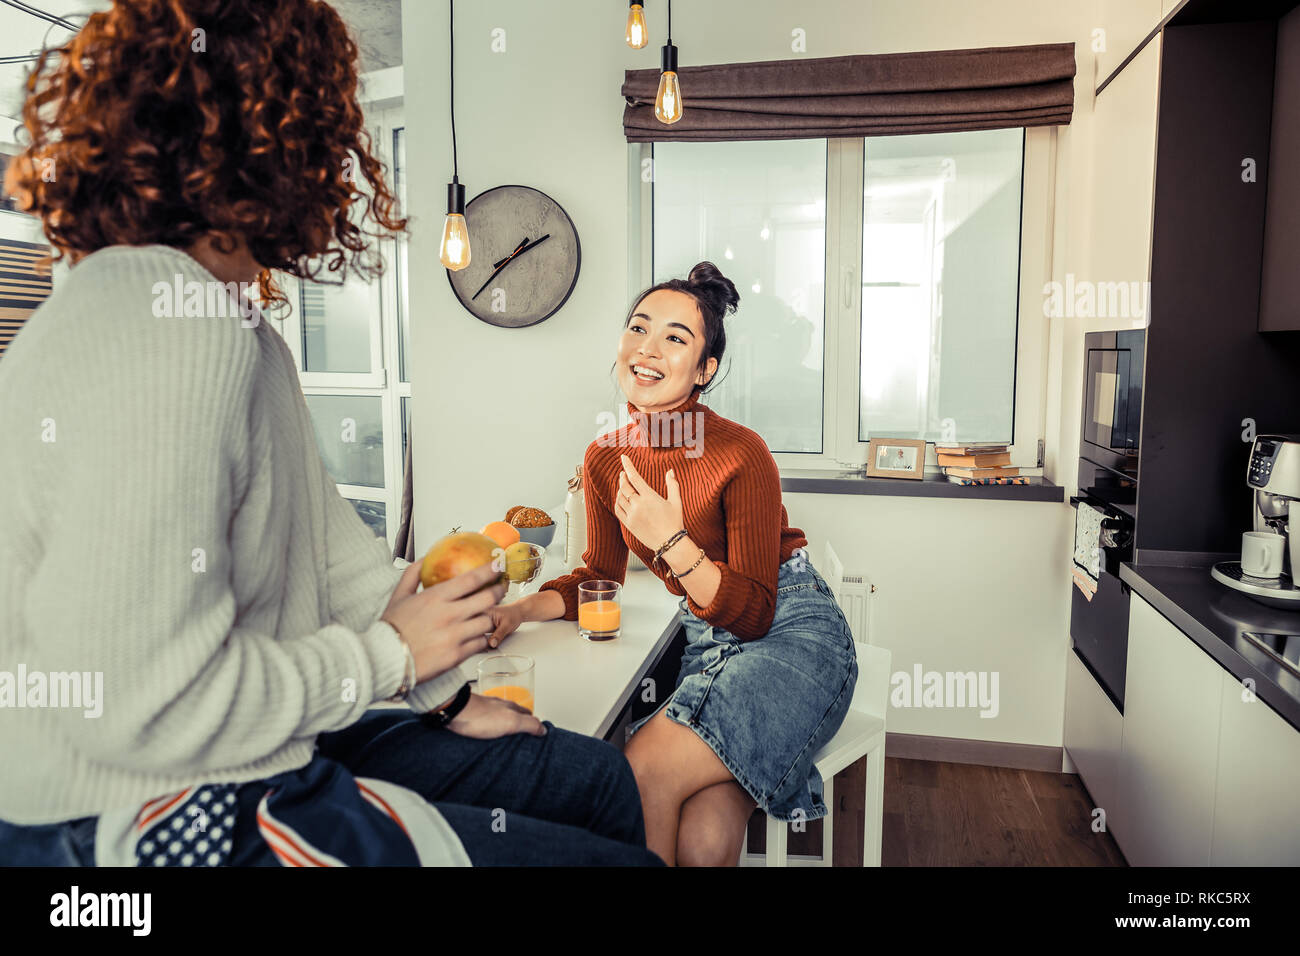 Roommates feeling involved in conversation in the kitchen Stock Photo